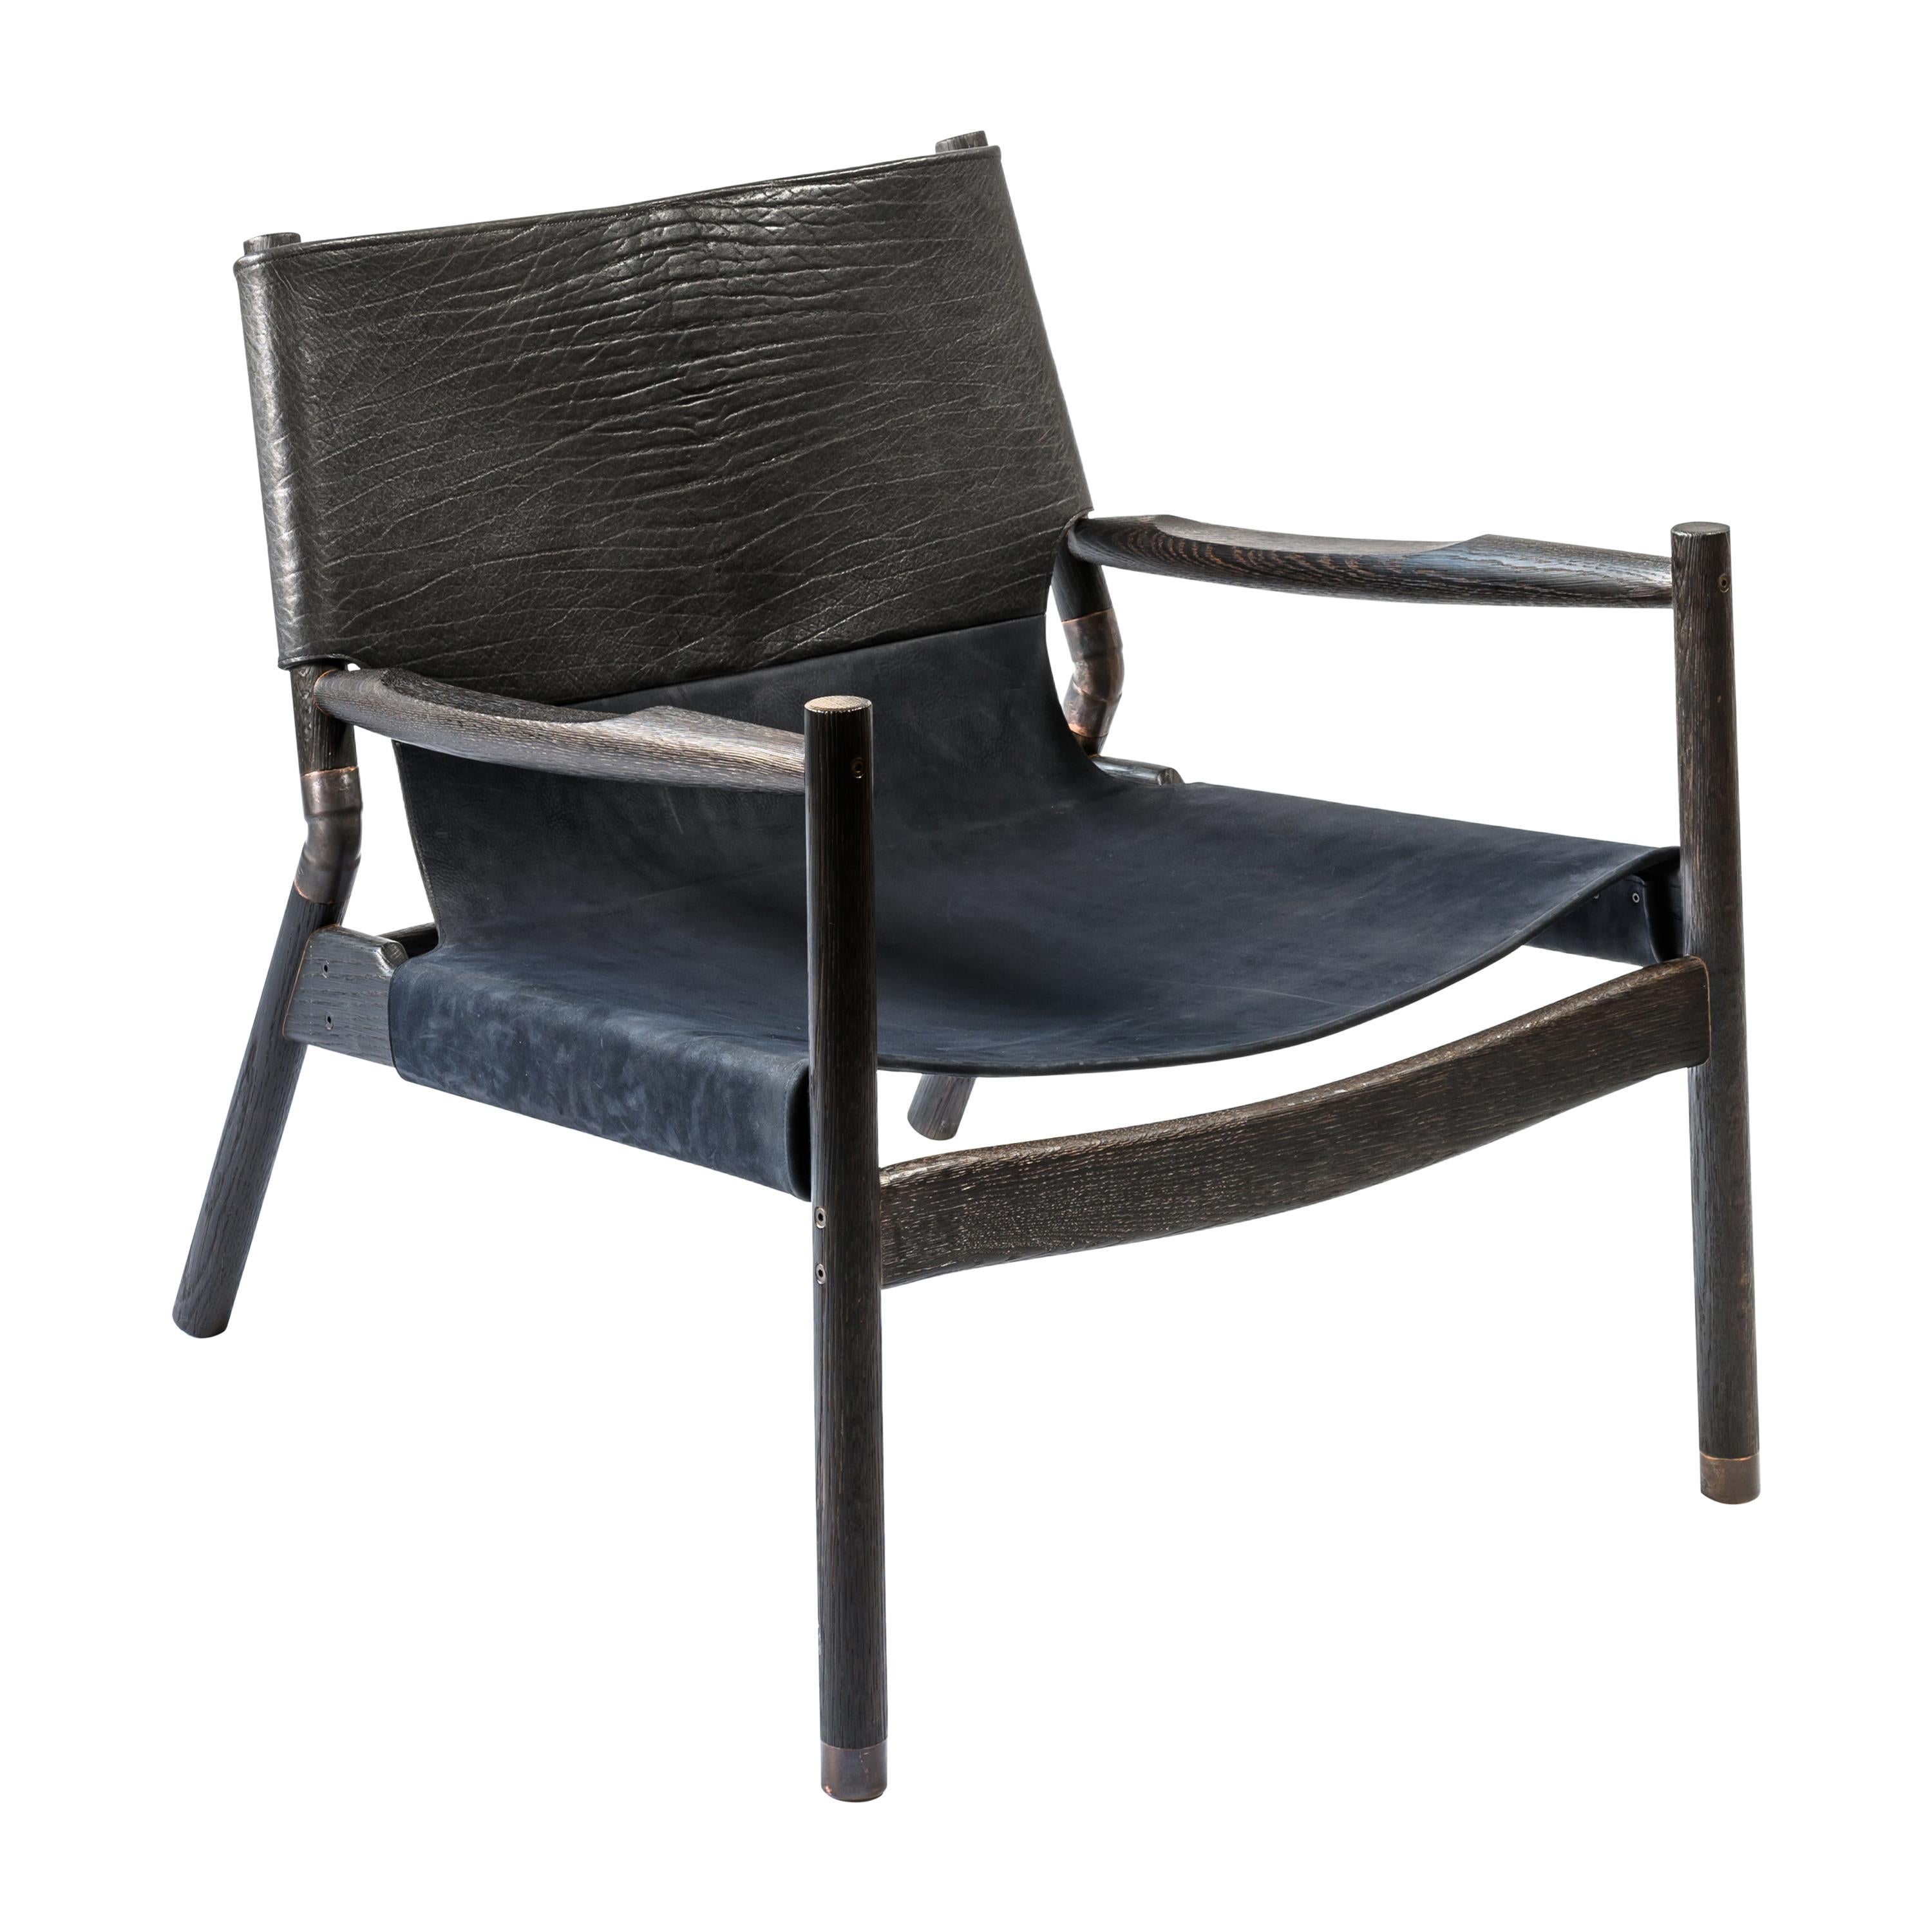 EÆ Slung Leather Lounge Chair in Bison/ Navy Nubuck Leather with Charred Oak